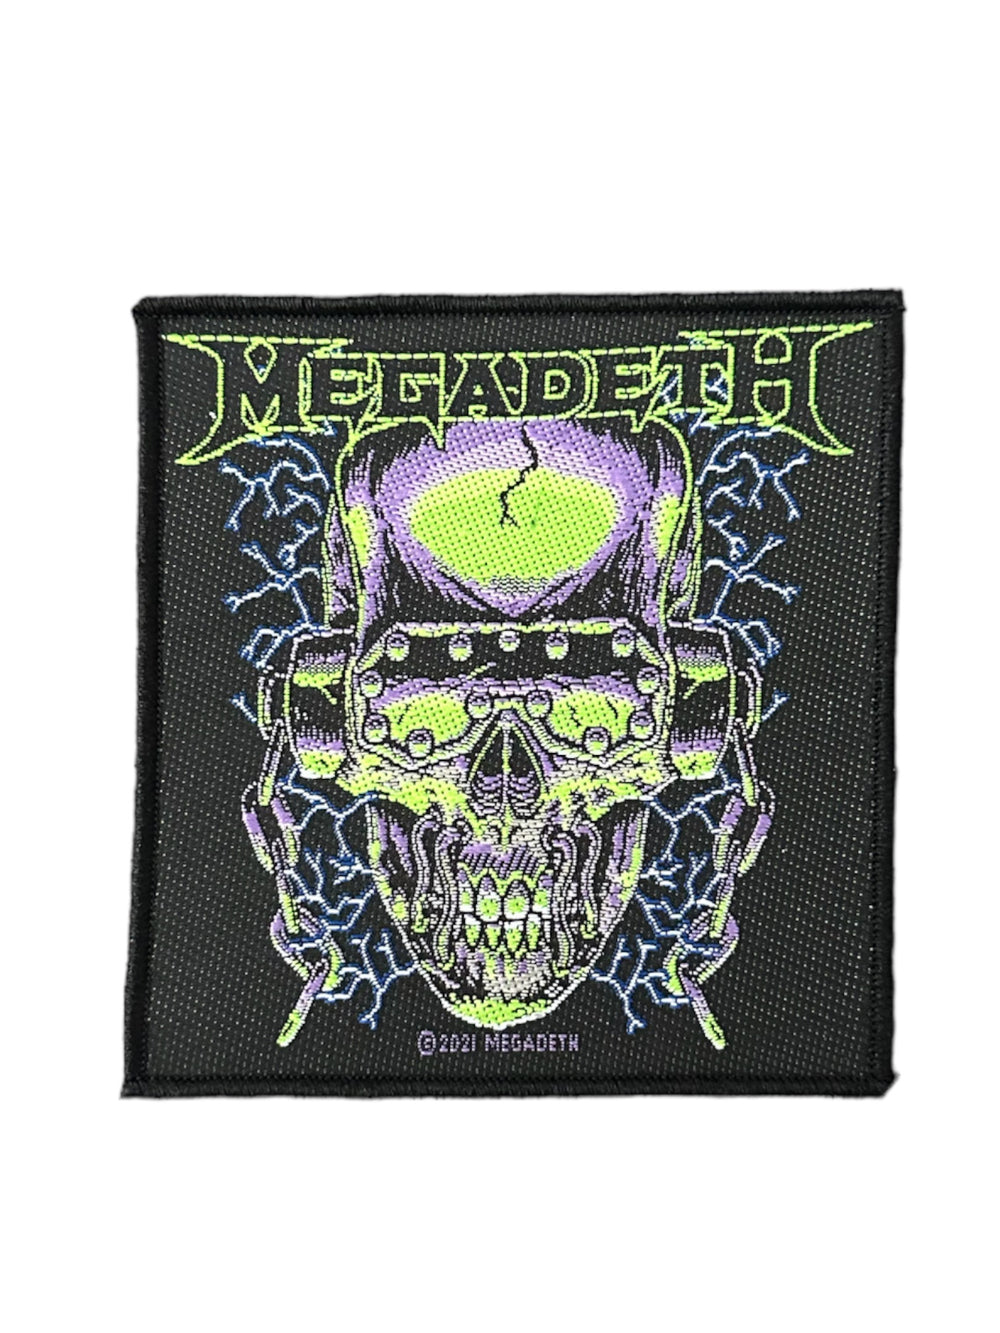 Megadeth Vic Rattlehead Official Sew On Woven Patch Brand New